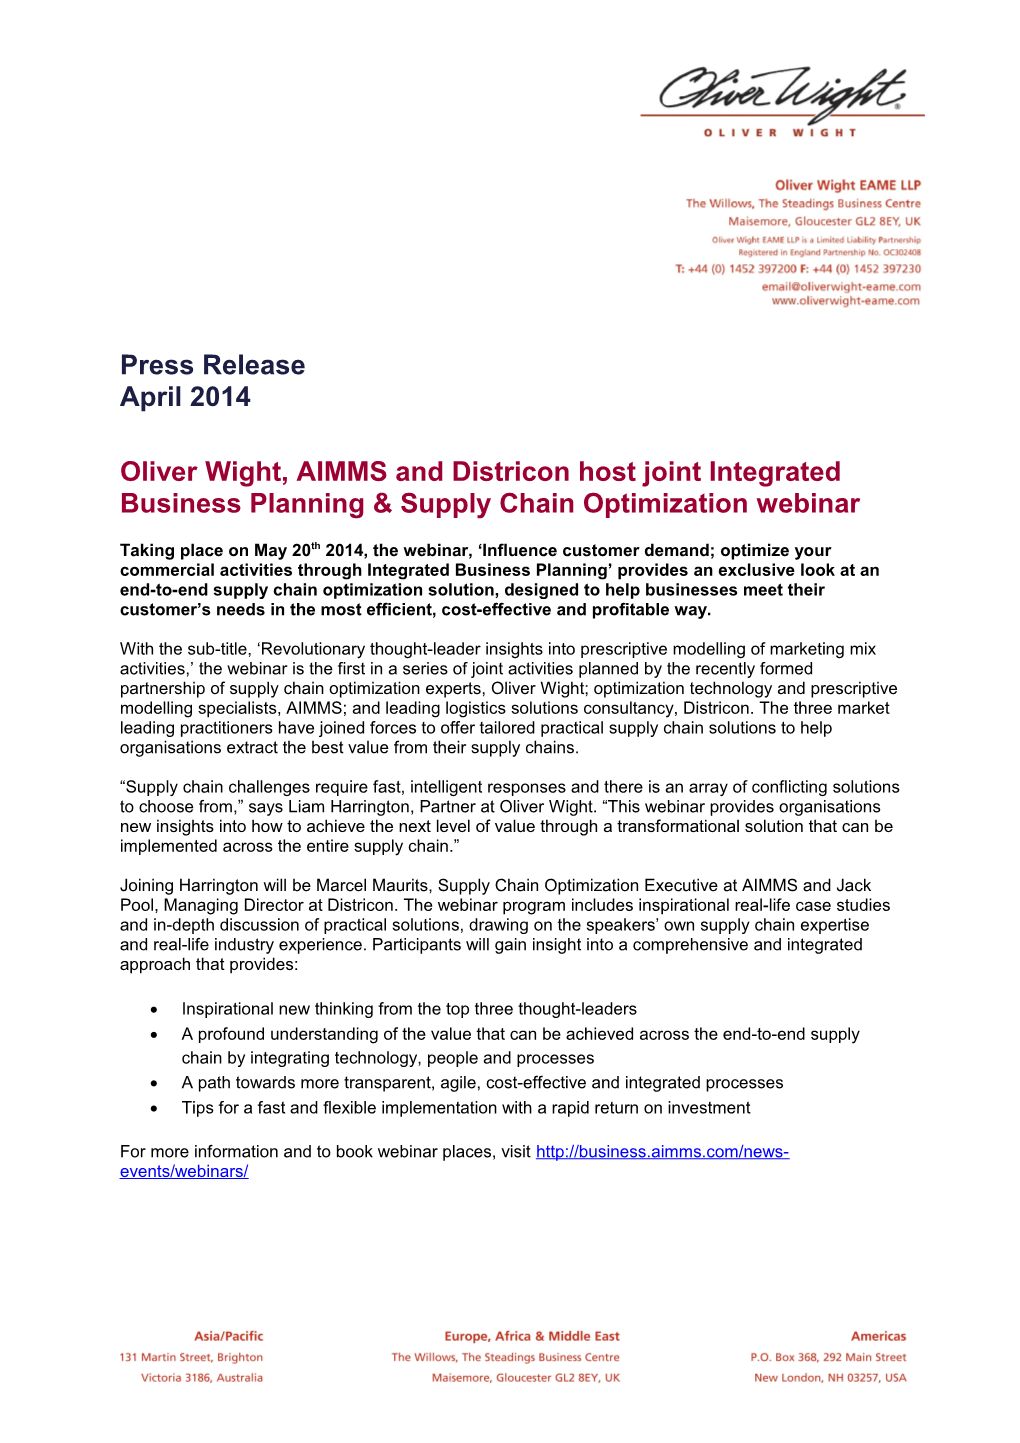 Oliver Wight, AIMMS and Districon Host Joint Integrated Business Planning & Supply Chain